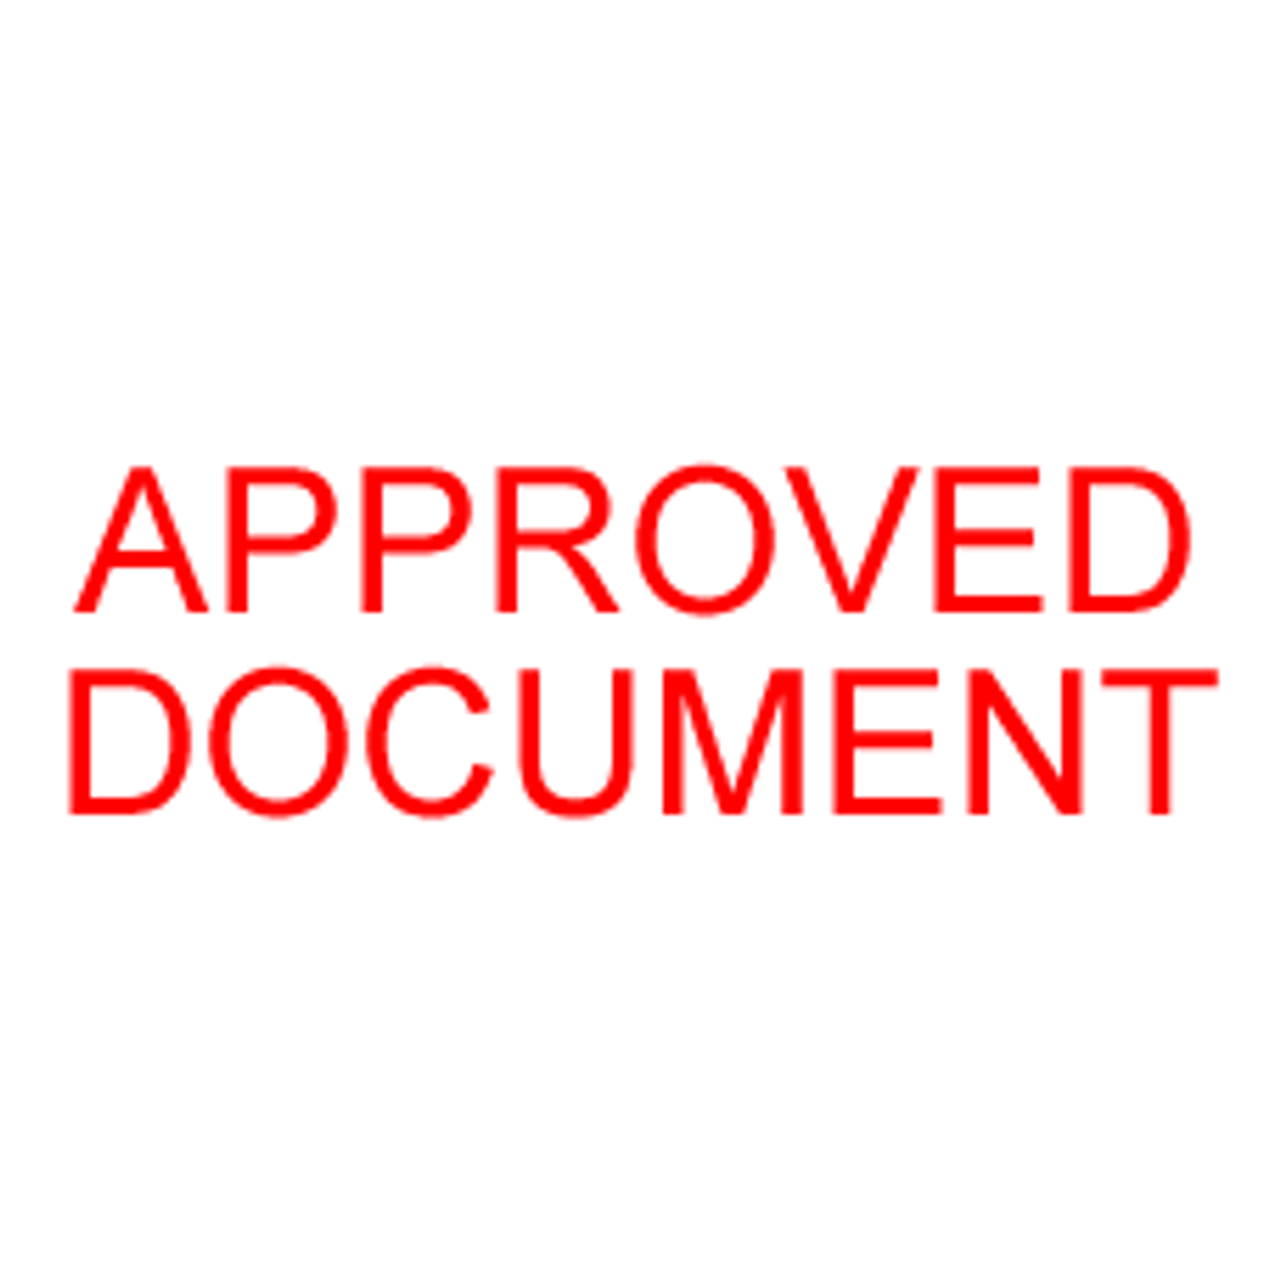 APPROVED DOCUMENT Rubber Stamp for office use self-inking